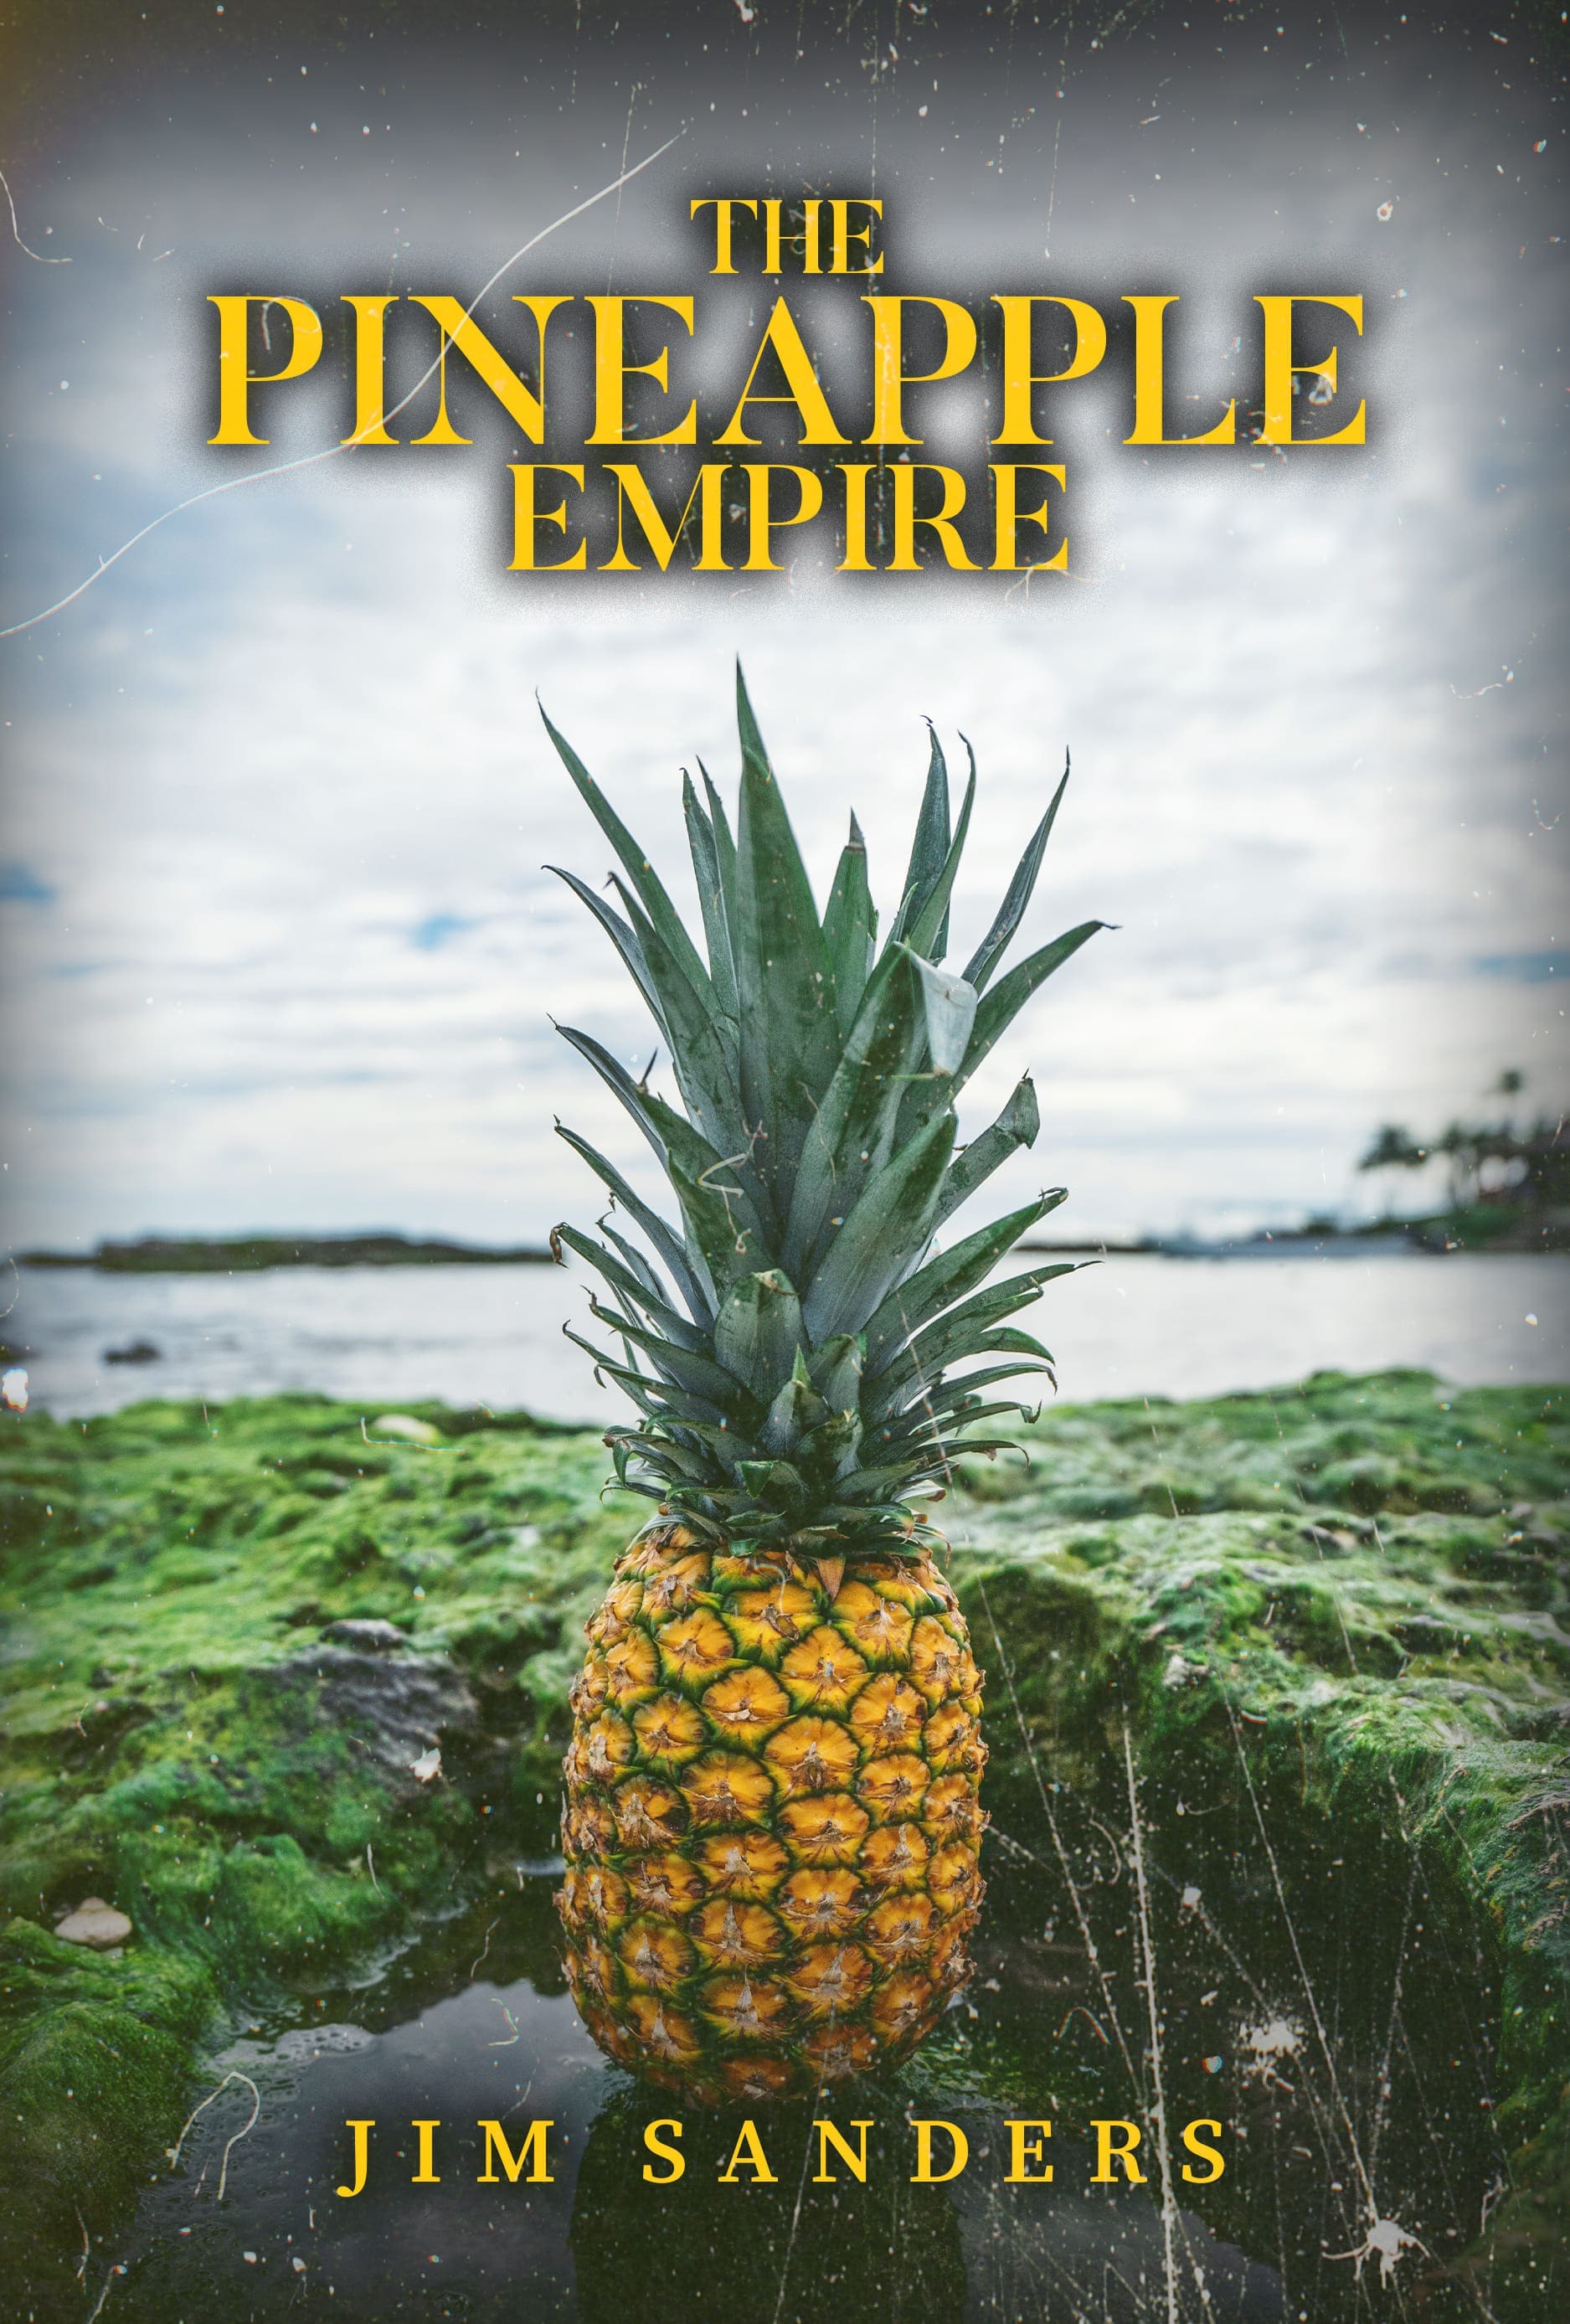 The Pineapple Empire by Jim Sanders - A captivating image showcasing the legacy of the pineapple industry